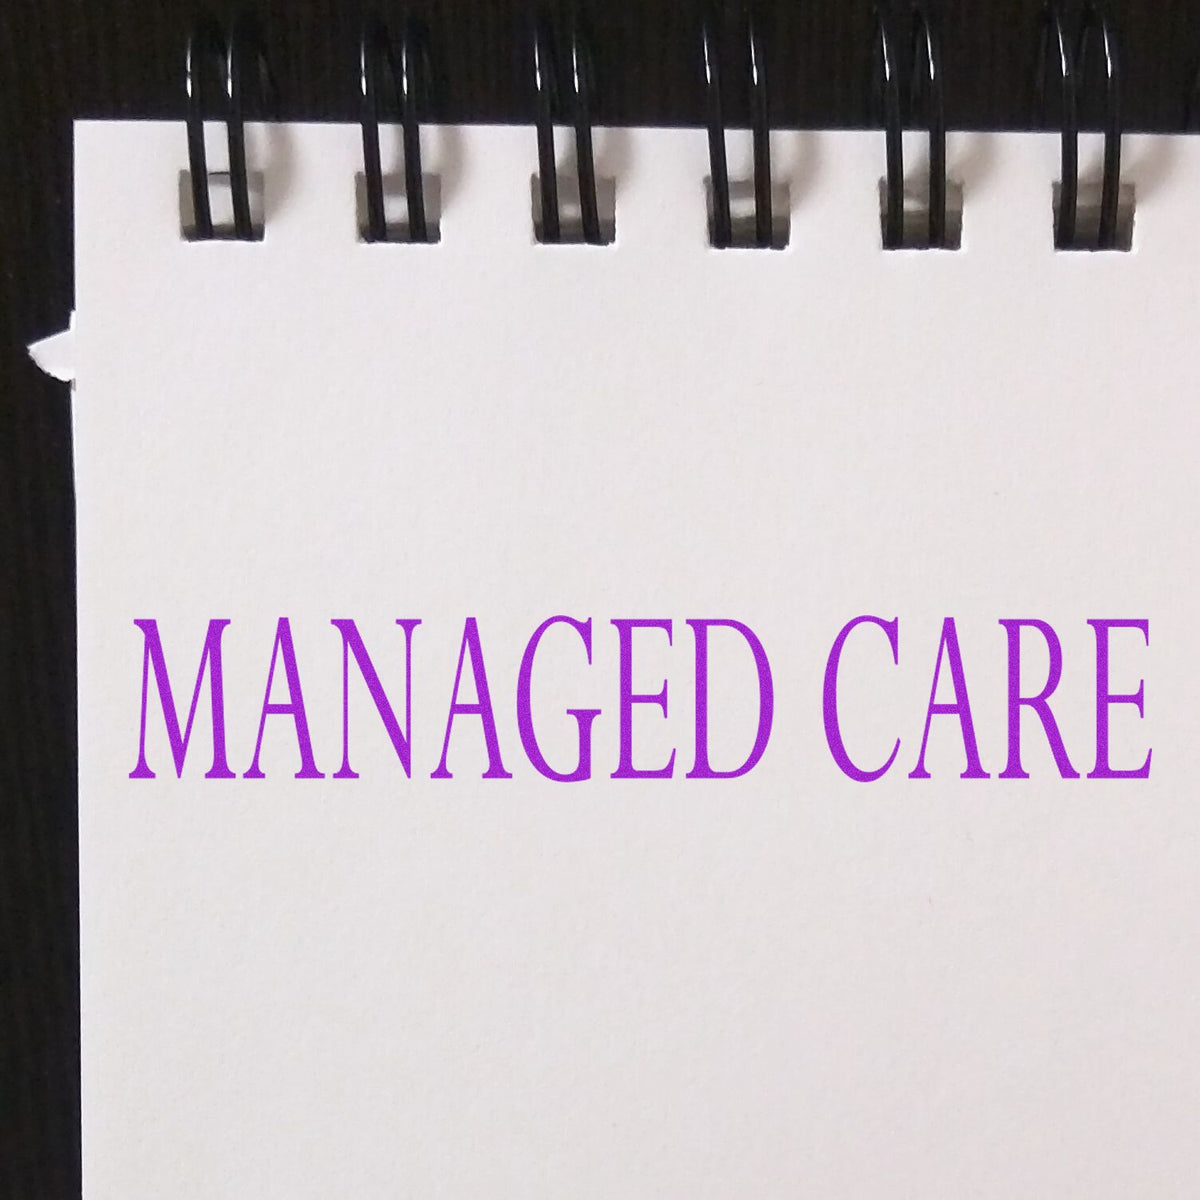 Large Managed Care Rubber Stamp In Use